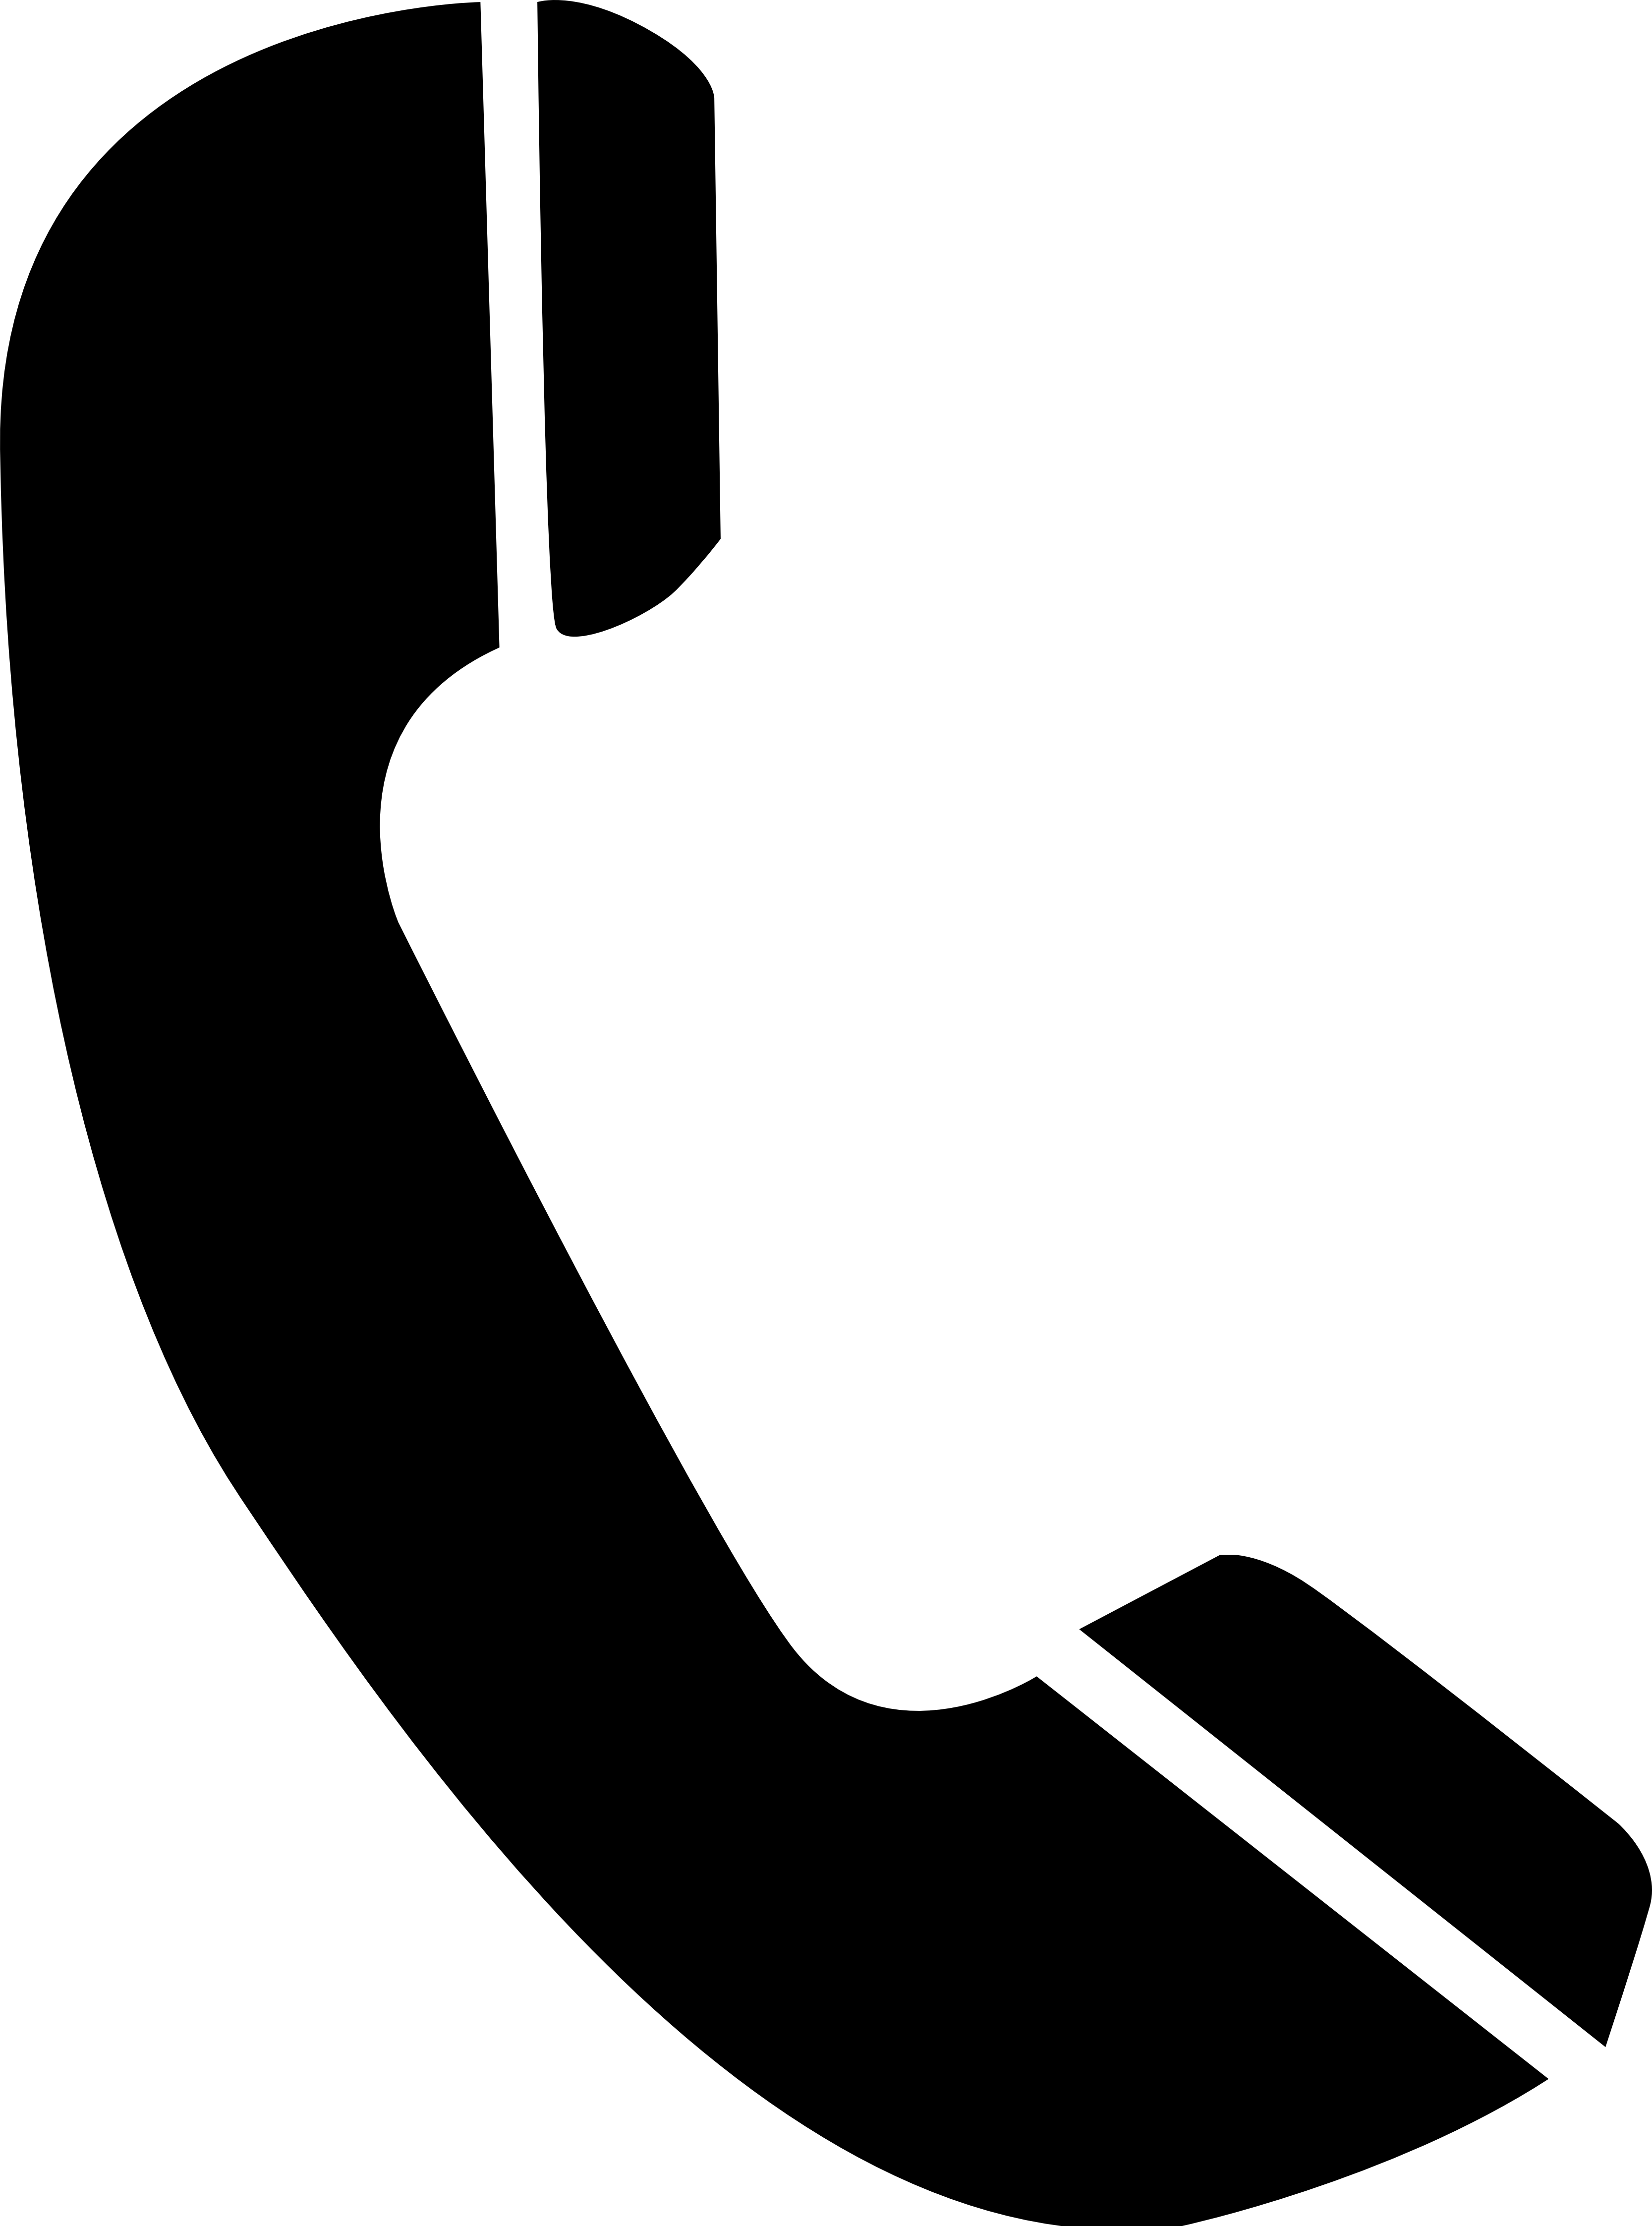 Telephone Transparent Logo - Download TELEPHONE Free PNG transparent image and clipart